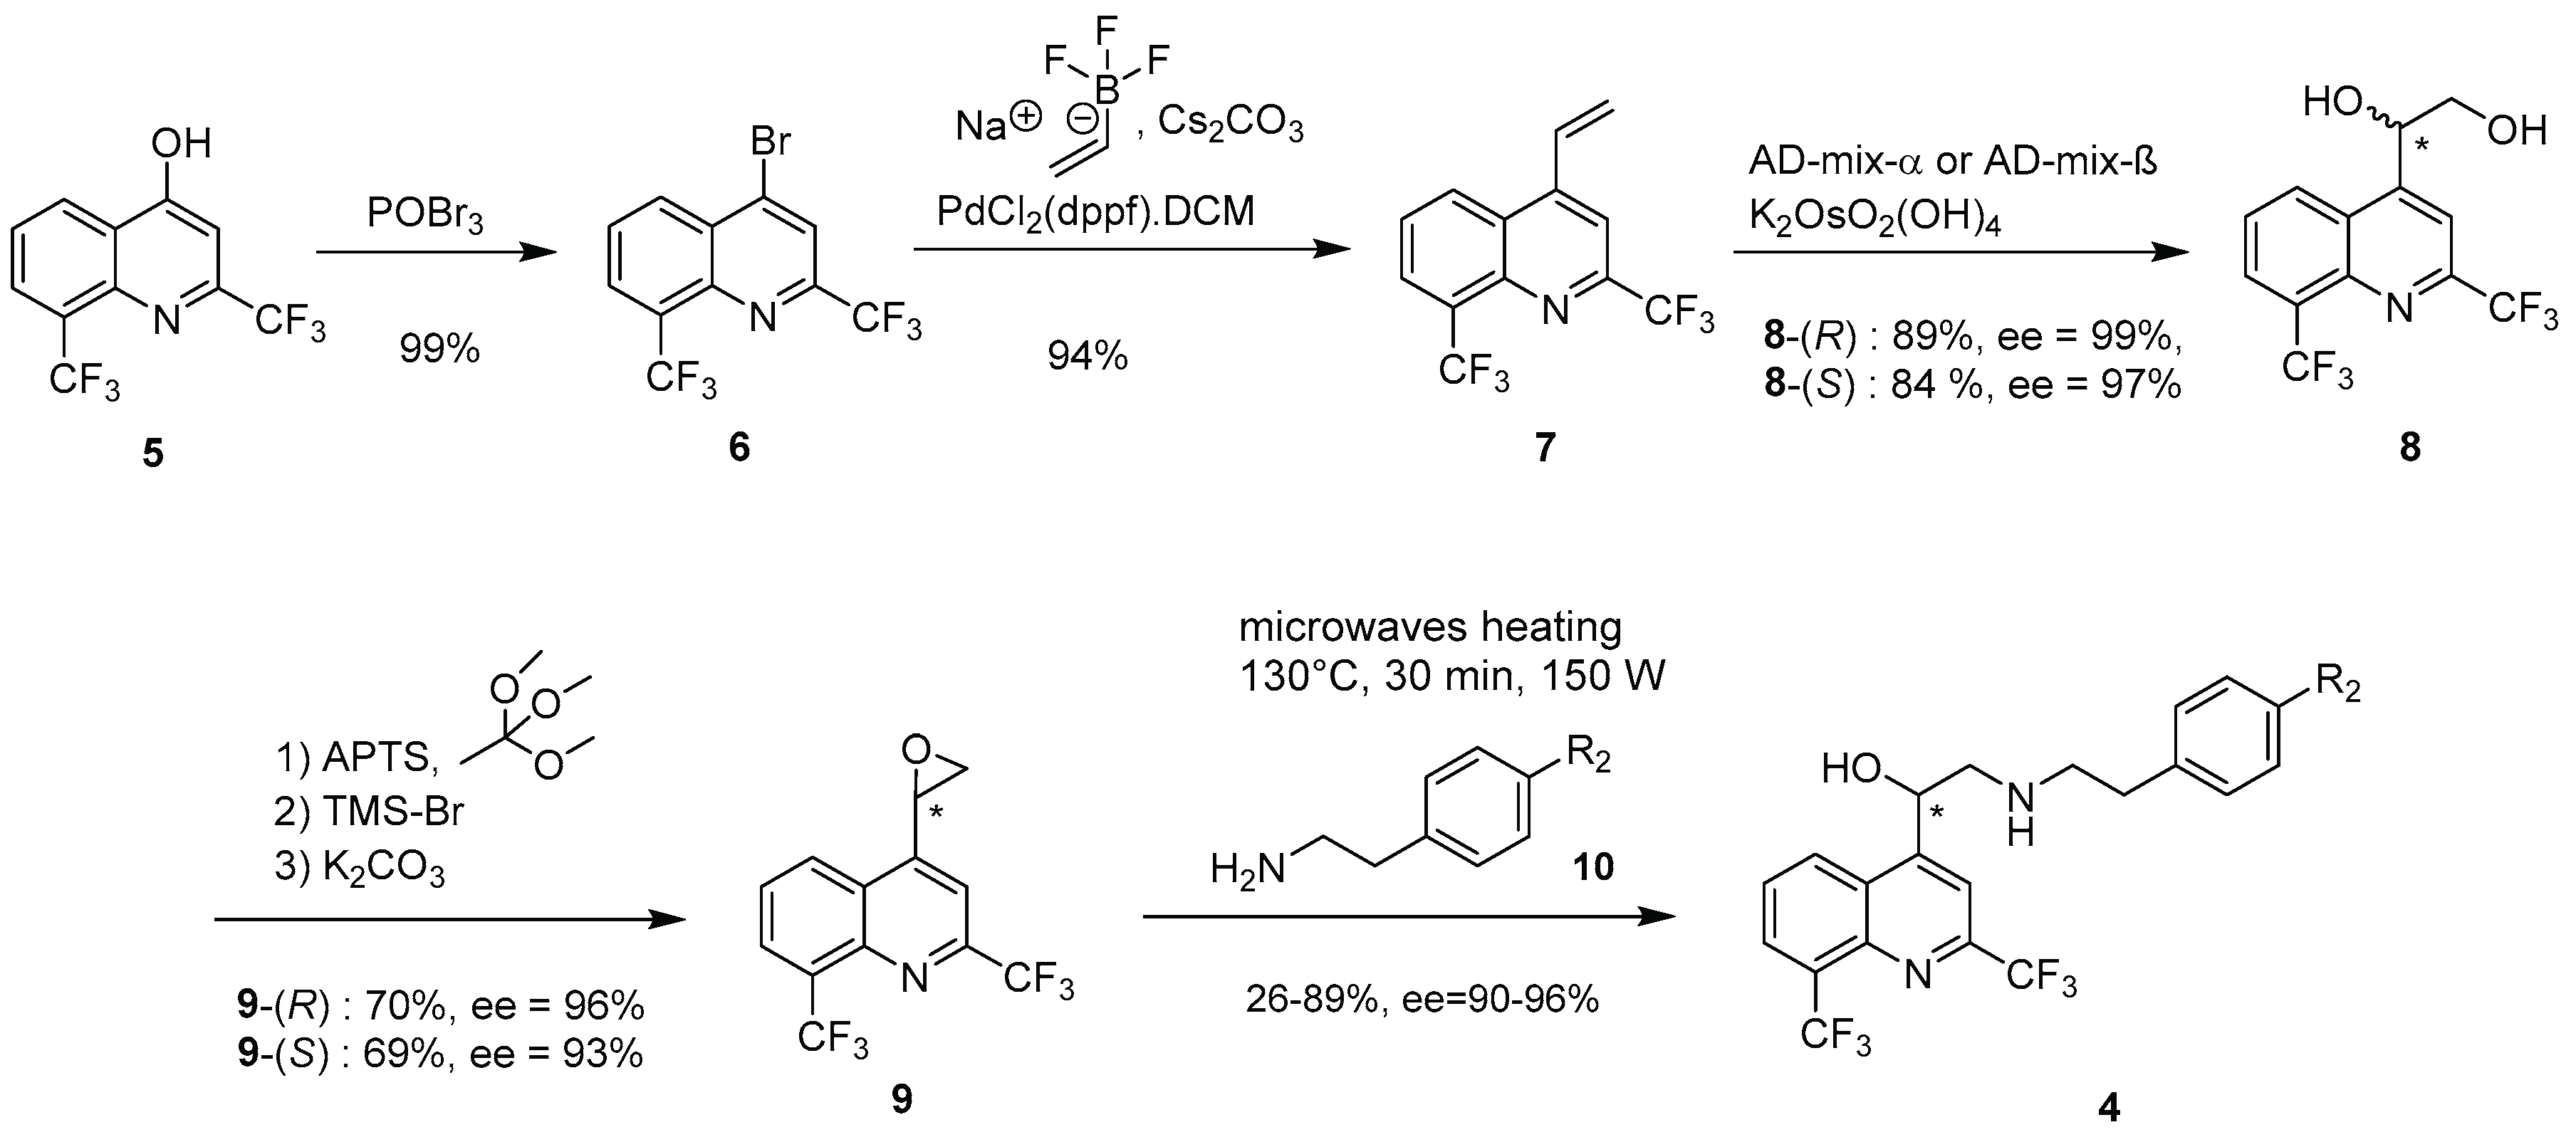 Synthesis of Isoquinoline-Derived Diene Esters and  Quinolin-2(1H)-ylidene-Substituted 1,5-Diones from Enynones and (Iso)  Quinoline N-Oxides